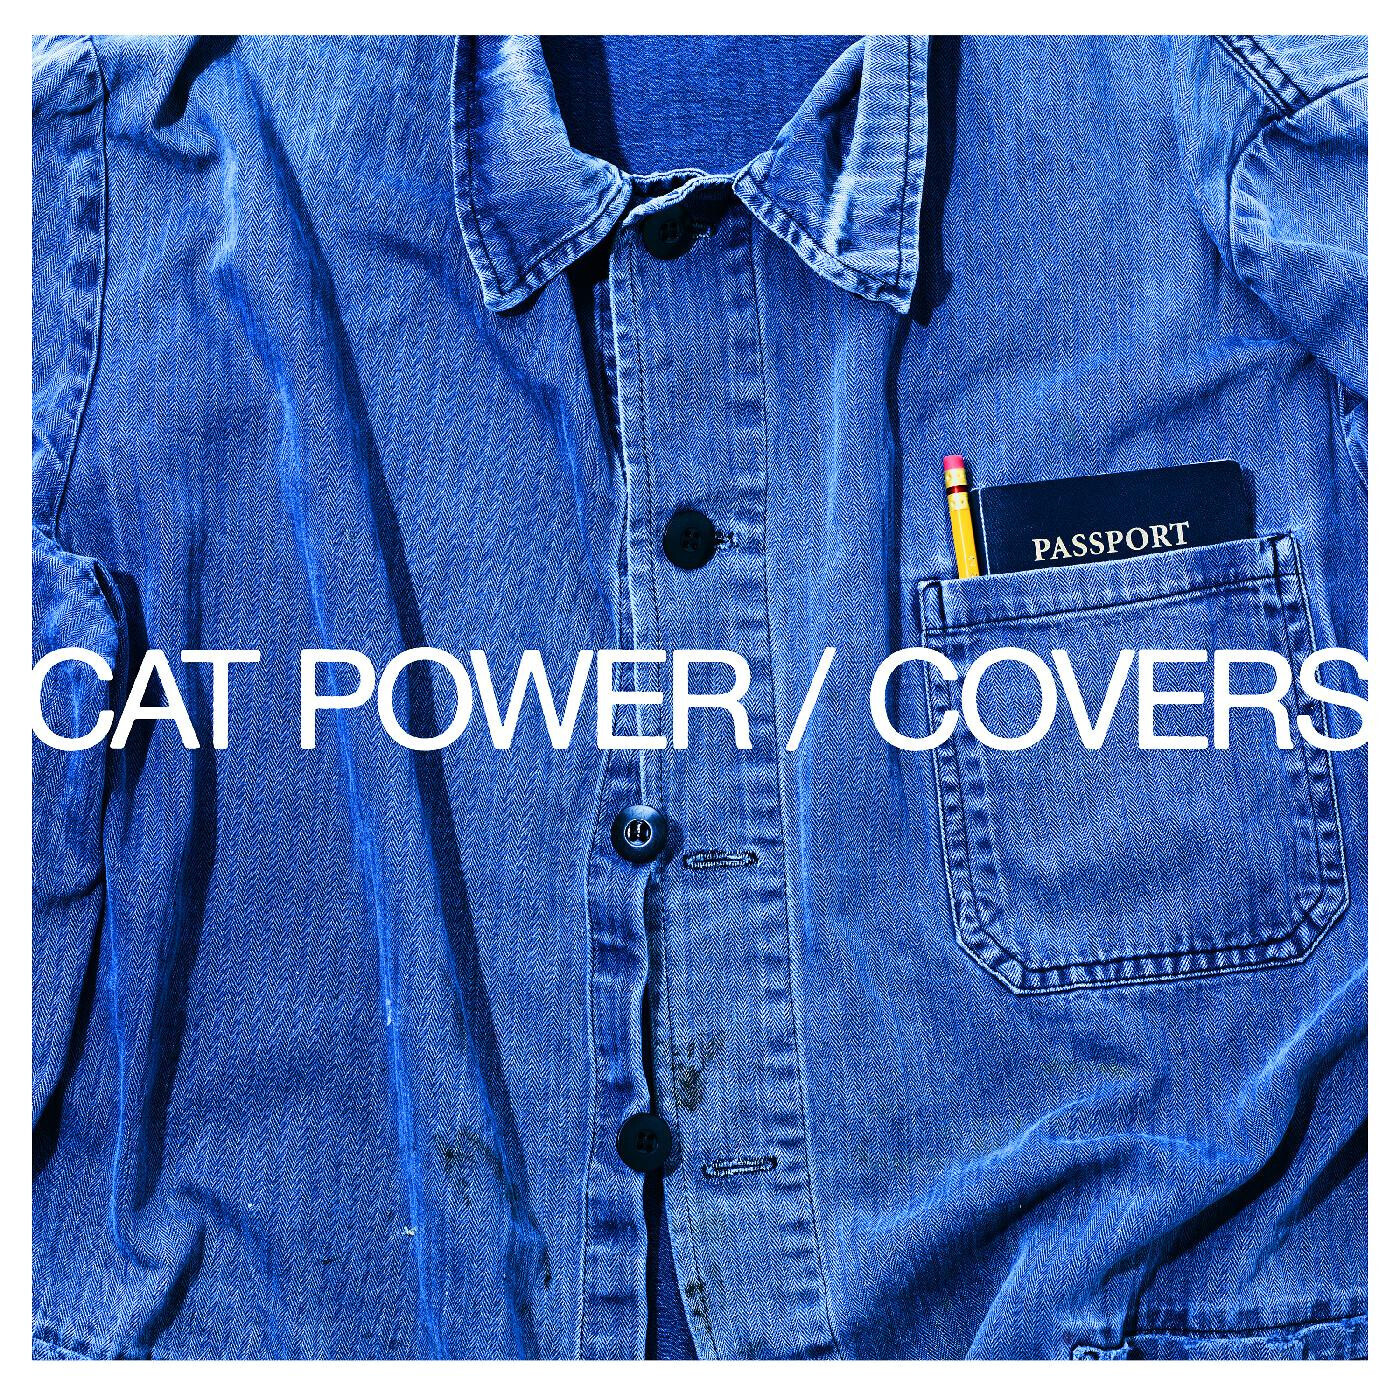 Cat Power "Covers" 